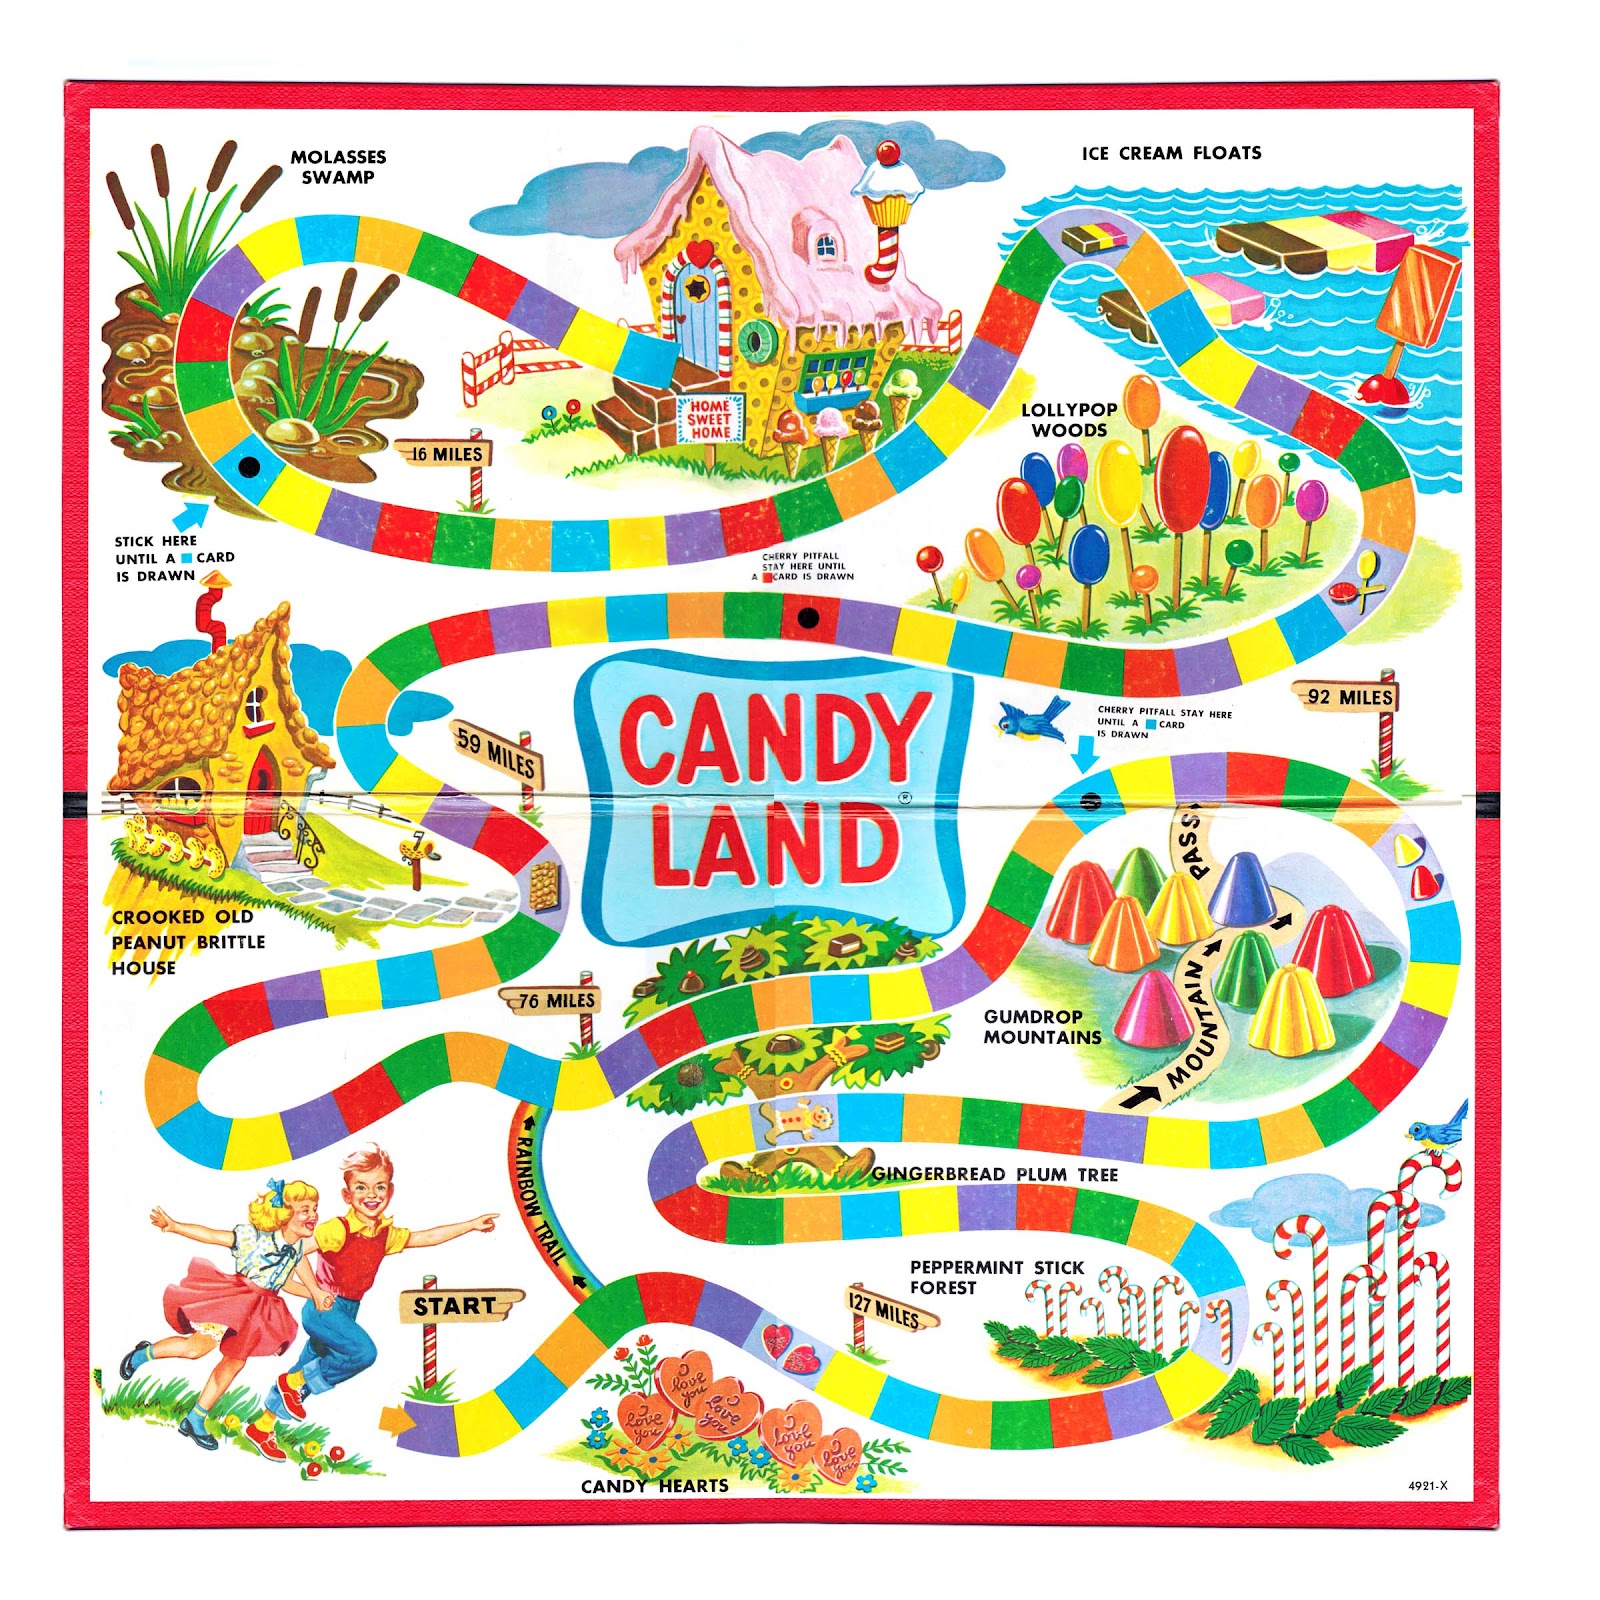 when-did-the-board-game-candyland-come-out